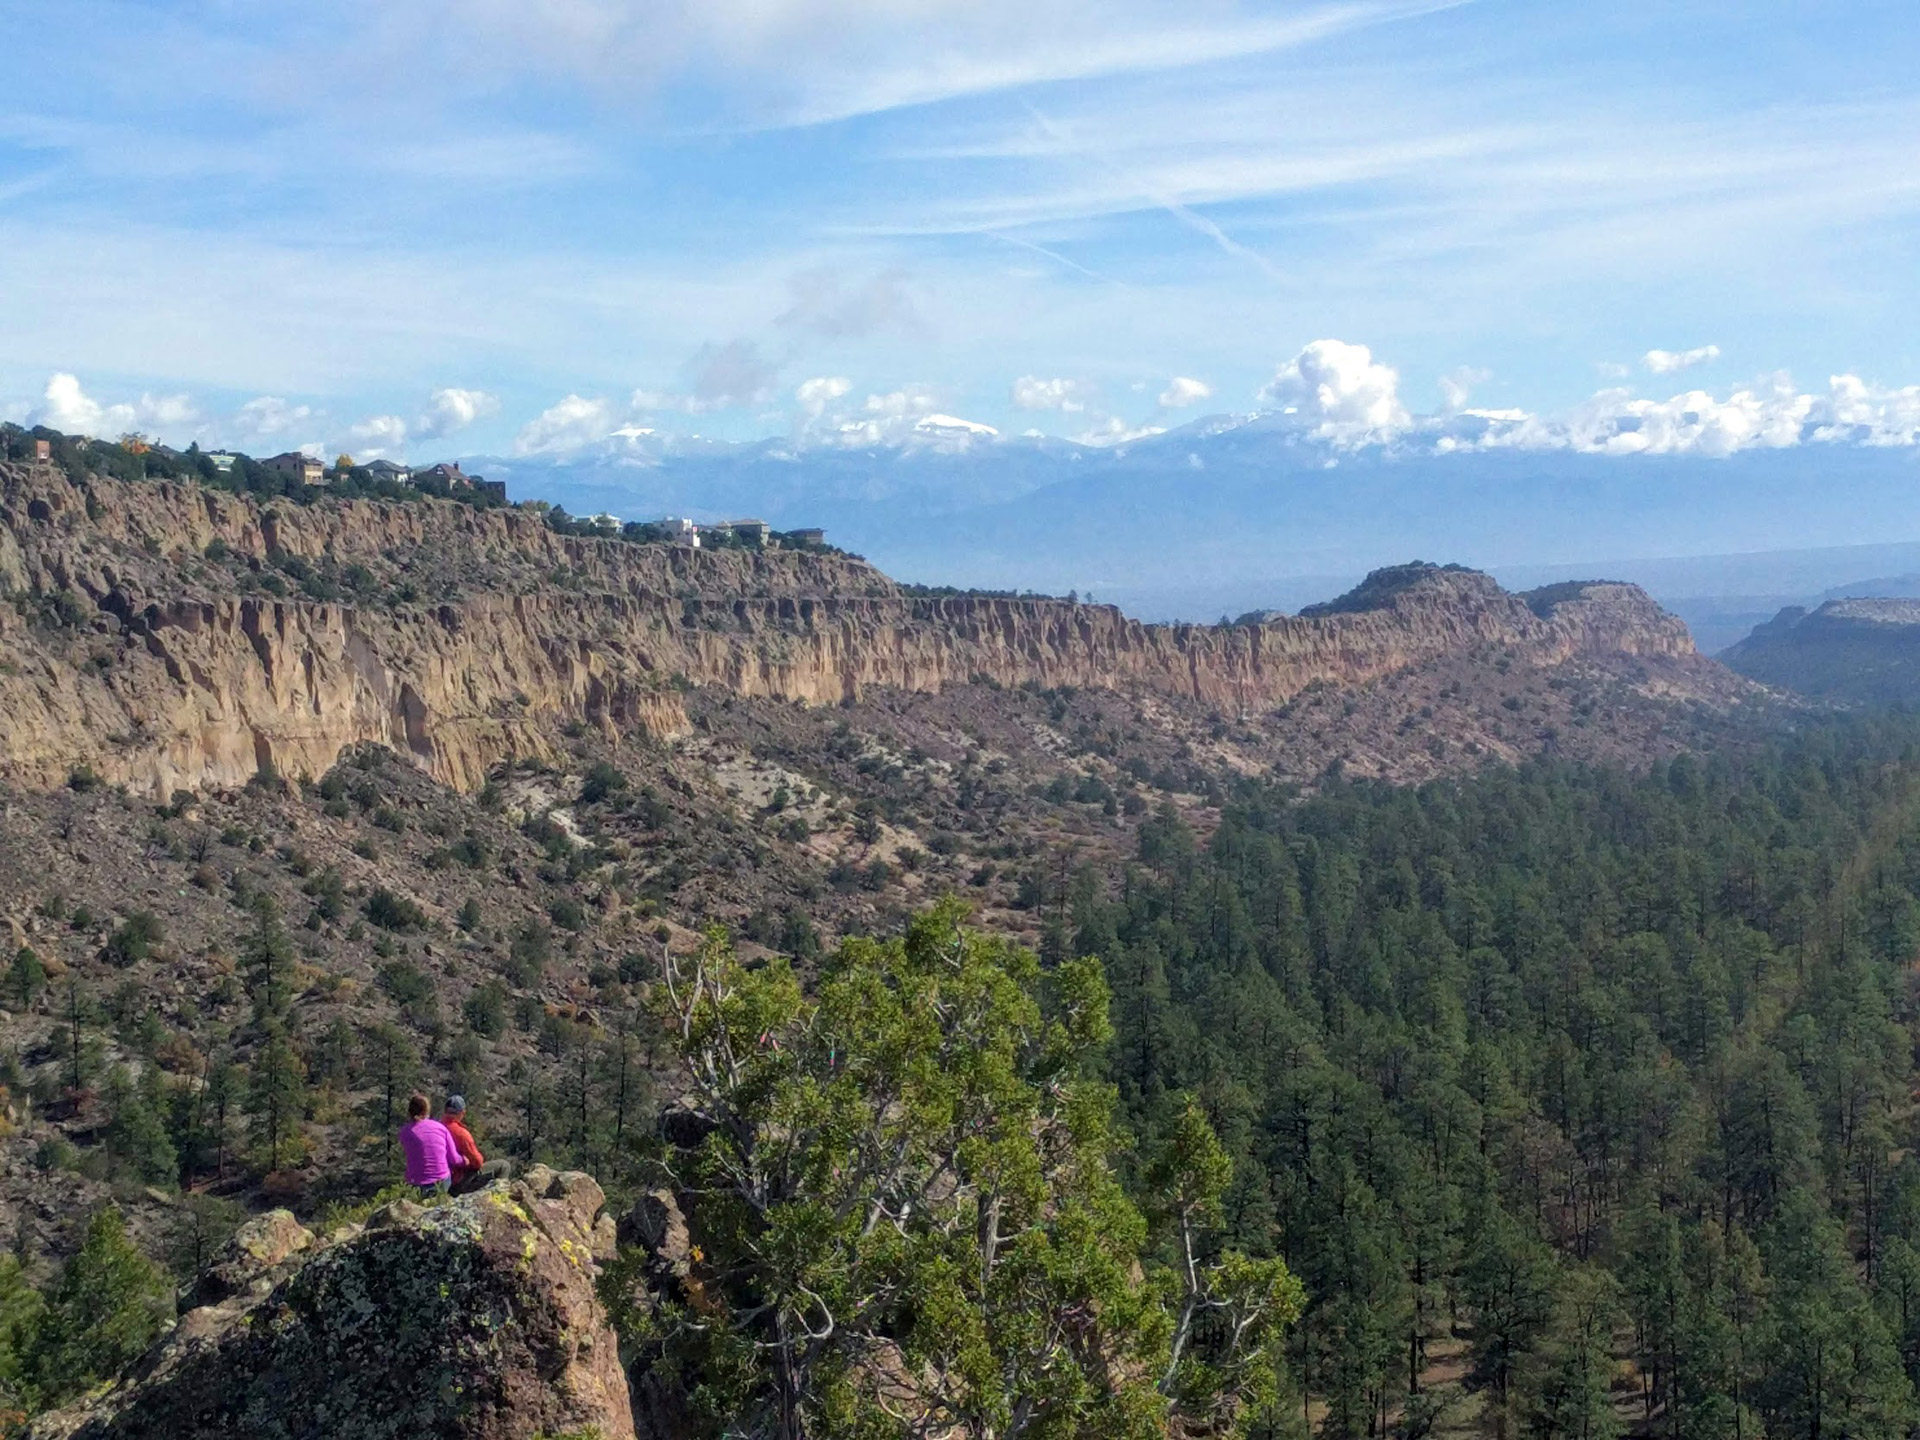 From Science to Scenery: 13 Best Things to Do in Los Alamos